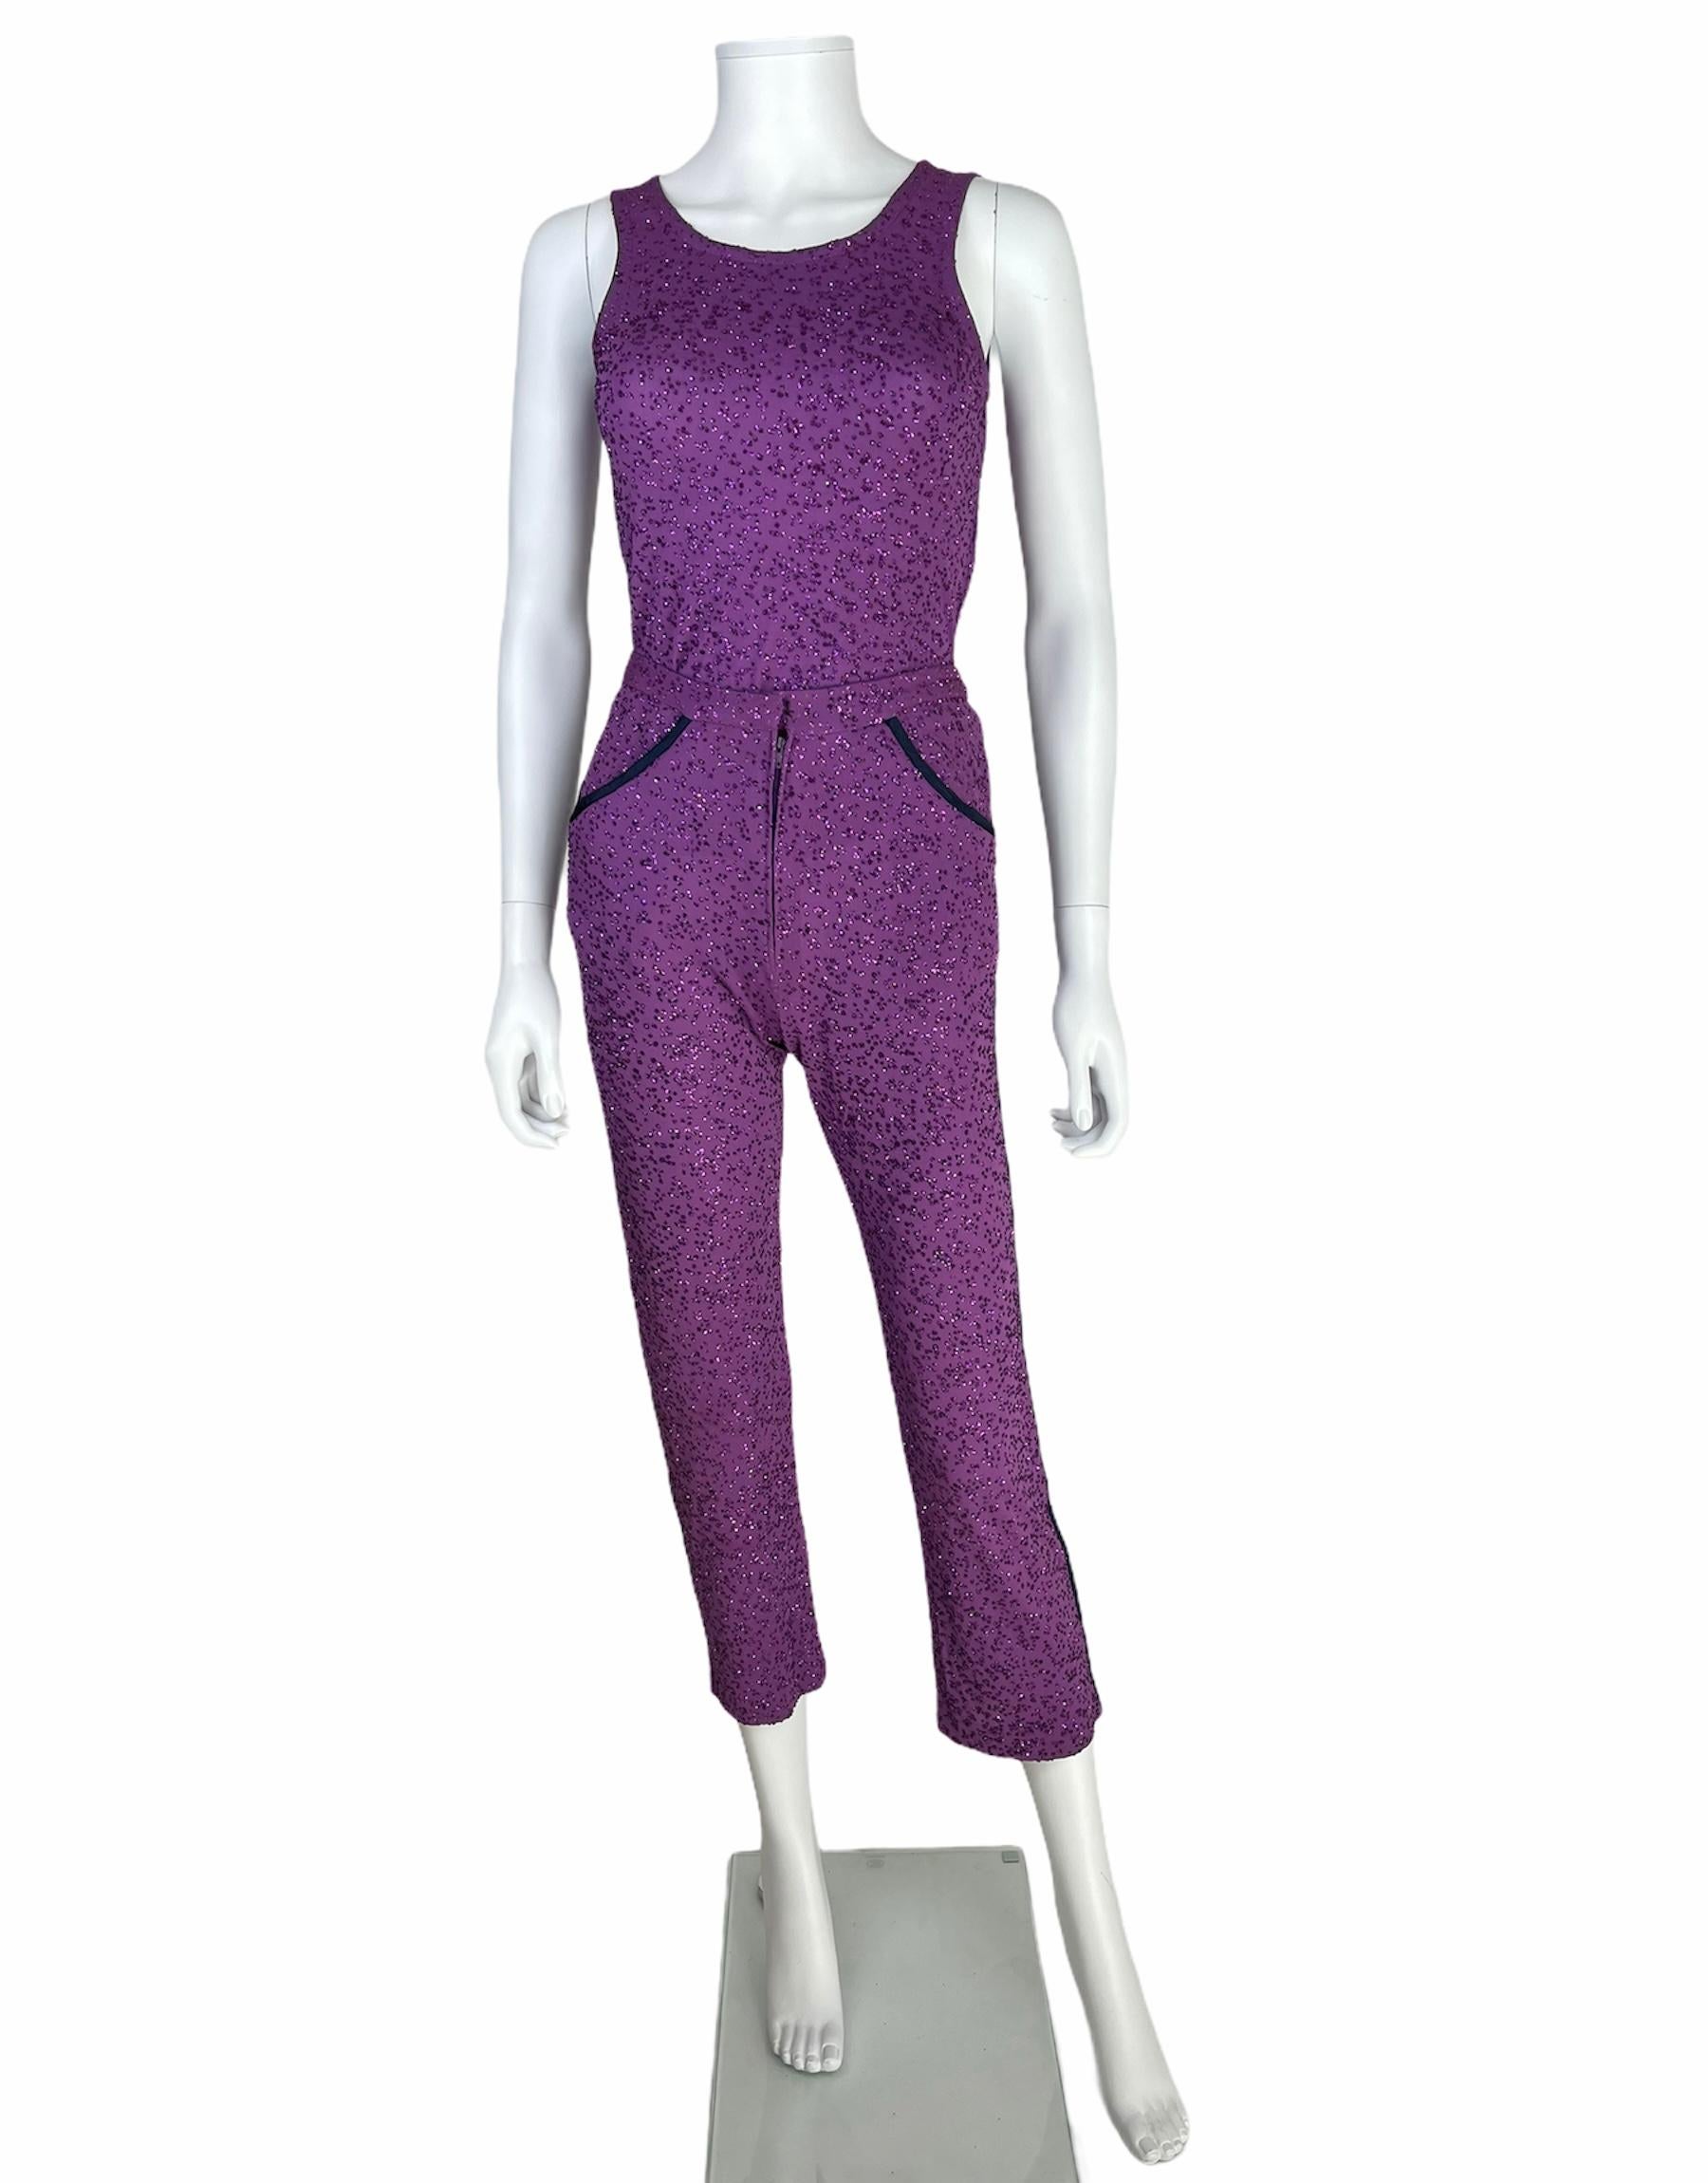 ANGELO TARLAZZI, Made in France circa 90's. 
Set of two purples pieces composed of a tank top and capri pants. 
Synthetic fibers with glitters everywhere. No lining. 
Sizes are quite small, I would recommend for XS (34/36 EU). Please see approx